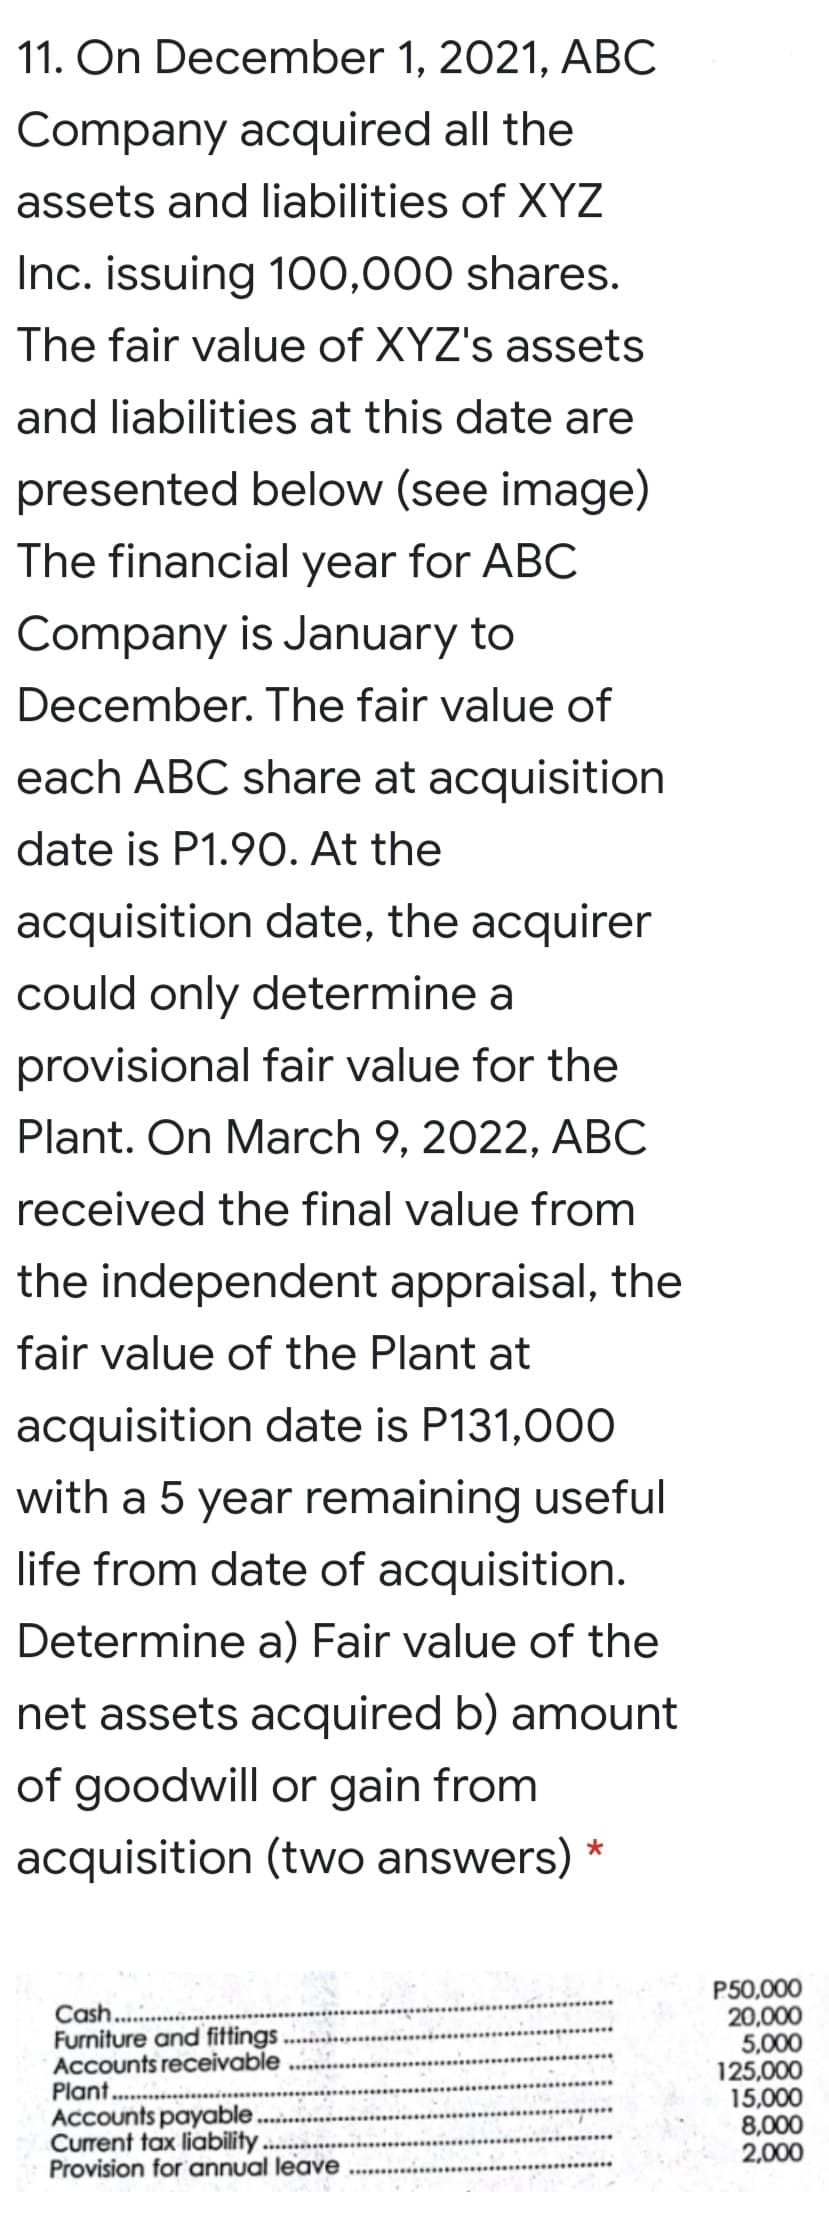 11. On December 1, 2021, ABC
Company acquired all the
assets and liabilities of XYZ
Inc. issuing 100,000 shares.
The fair value of XYZ's assets
and liabilities at this date are
presented below (see image)
The financial year for ABC
Company is January to
December. The fair value of
each ABC share at acquisition
date is P1.90. At the
acquisition date, the acquirer
could only determine a
provisional fair value for the
Plant. On March 9, 2022, ABC
received the final value from
the independent appraisal, the
fair value of the Plant at
acquisition date is P131,000
with a 5 year remaining useful
life from date of acquisition.
Determine a) Fair value of the
net assets acquired b) amount
of goodwill or gain from
acquisition (two answers)
Cash.
Furniture and fittings
Accounts receivable
Plant.
Accounts payable.
Current tax liability
Provision for annual leave
P50,000
20,000
5,000
125,000
15,000
8,000
2,000
